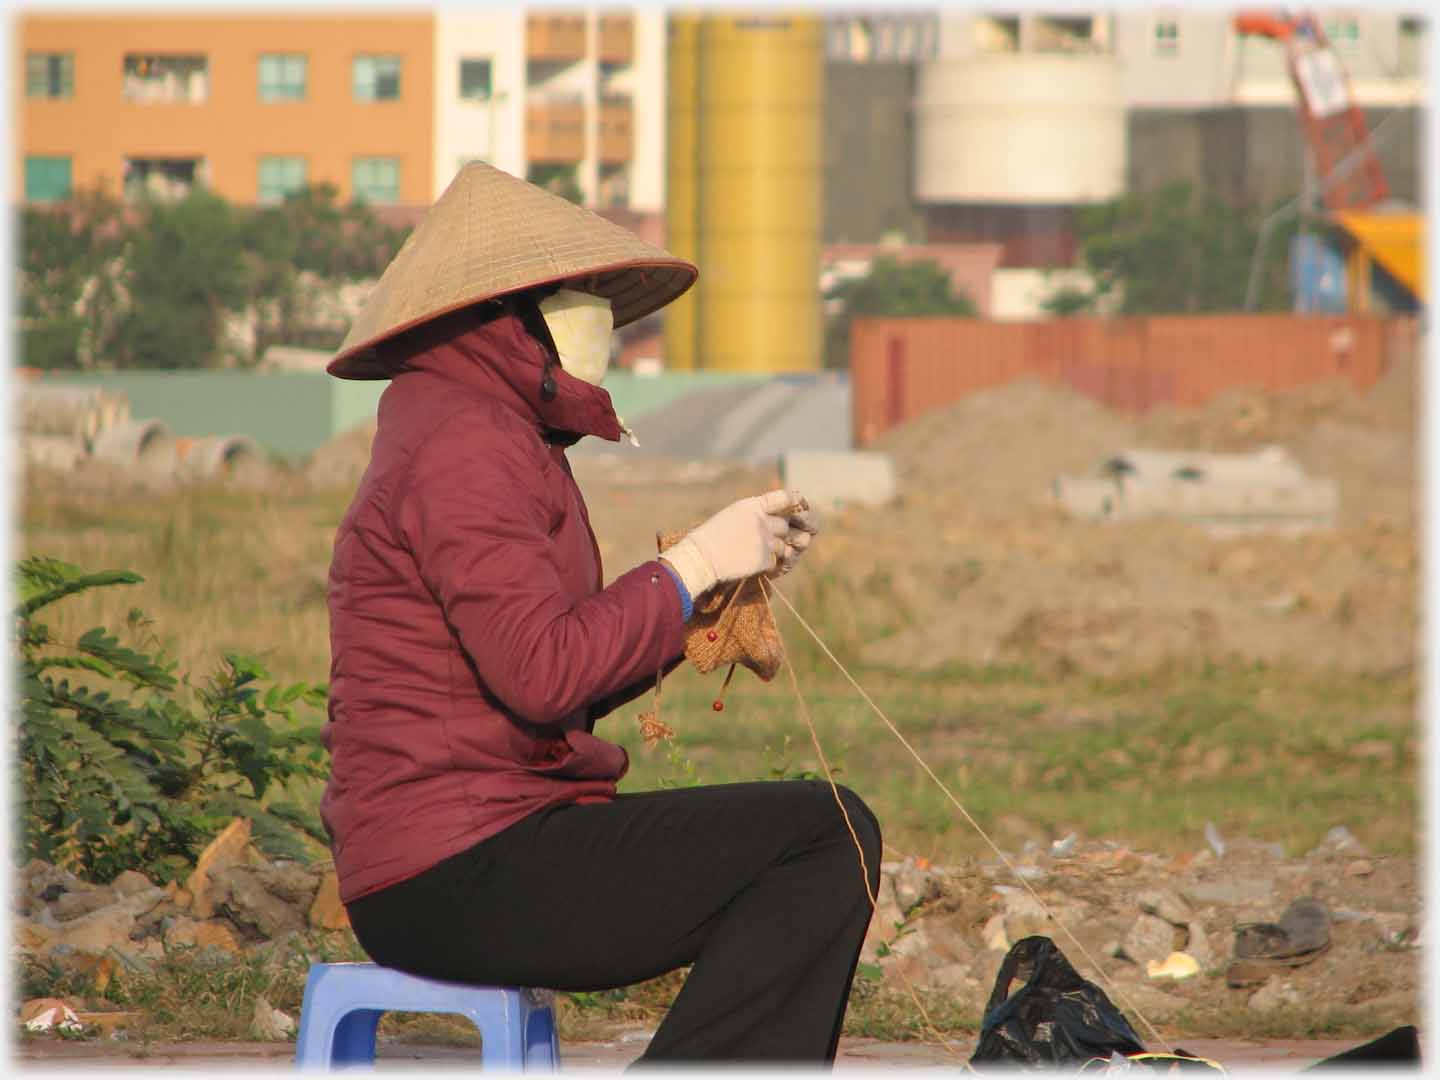 Behatted masked gloved seated woman knitting.